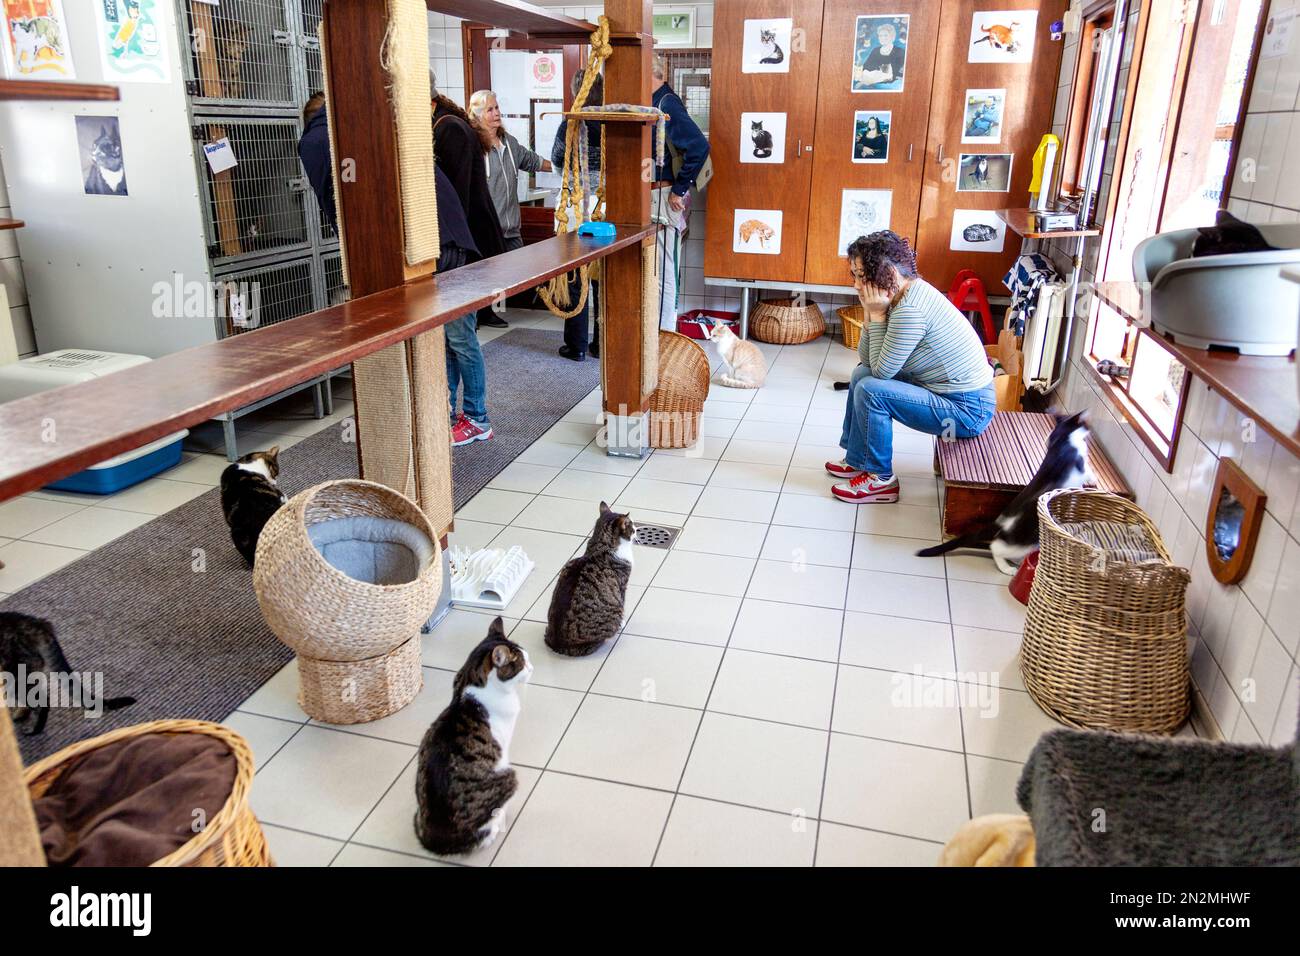 Interior of De Poezenboot cat shelter on a barge, Amsterdam, Netherlands Stock Photo